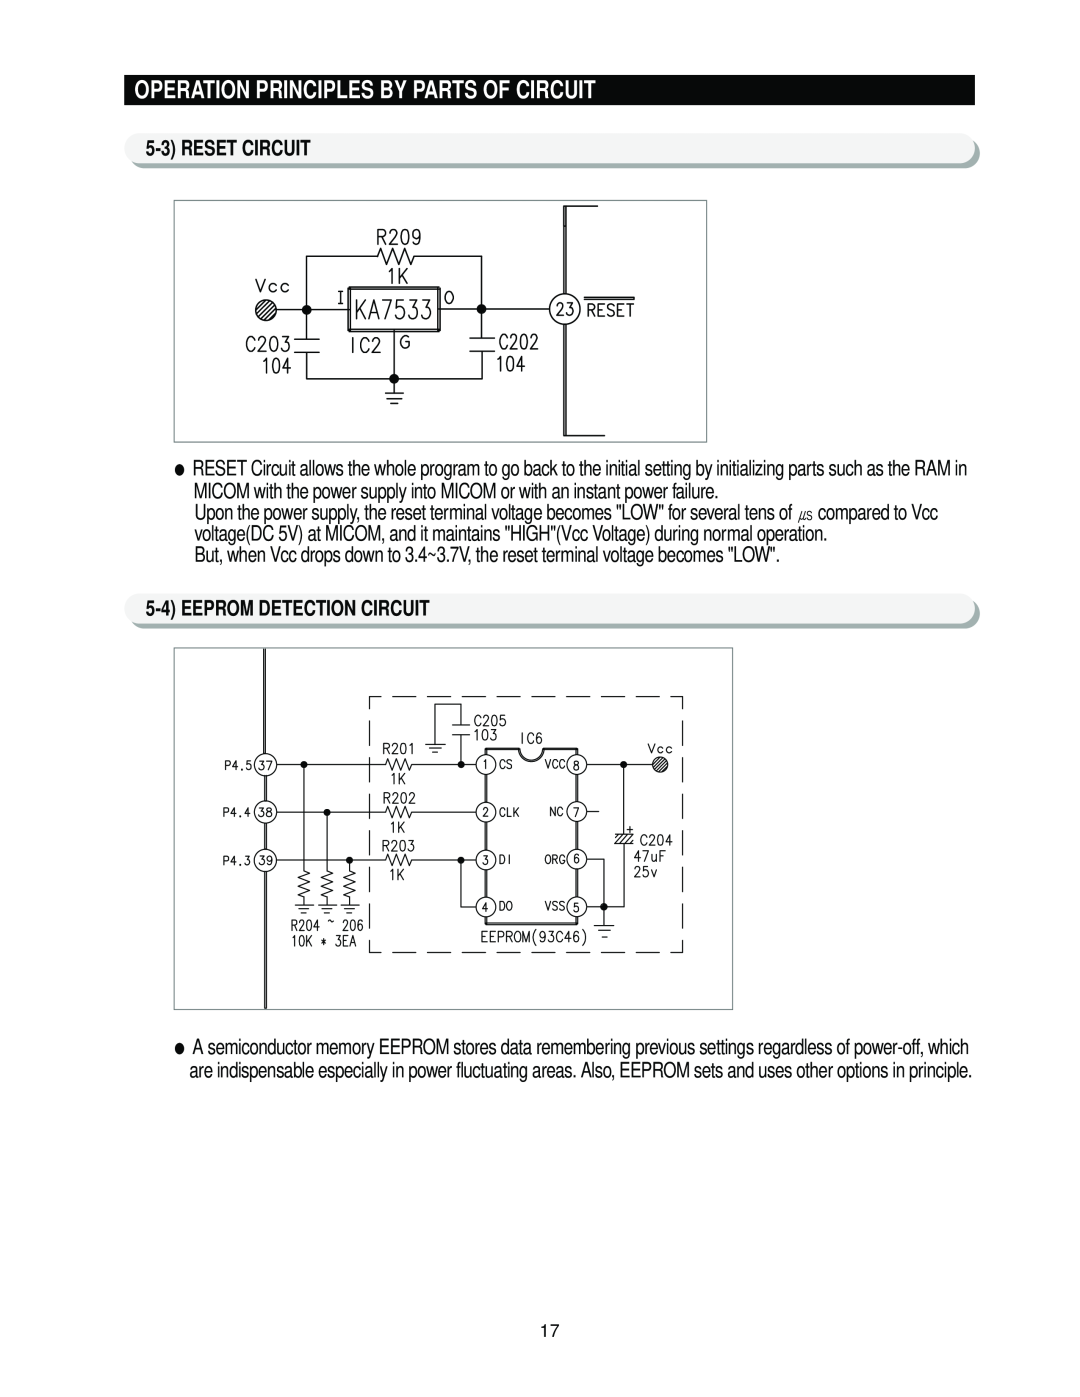 Samsung RS2*3* manual Operation Principles By Parts Of Circuit, 5-3RESET CIRCUIT, 5-4EEPROM DETECTION CIRCUIT 